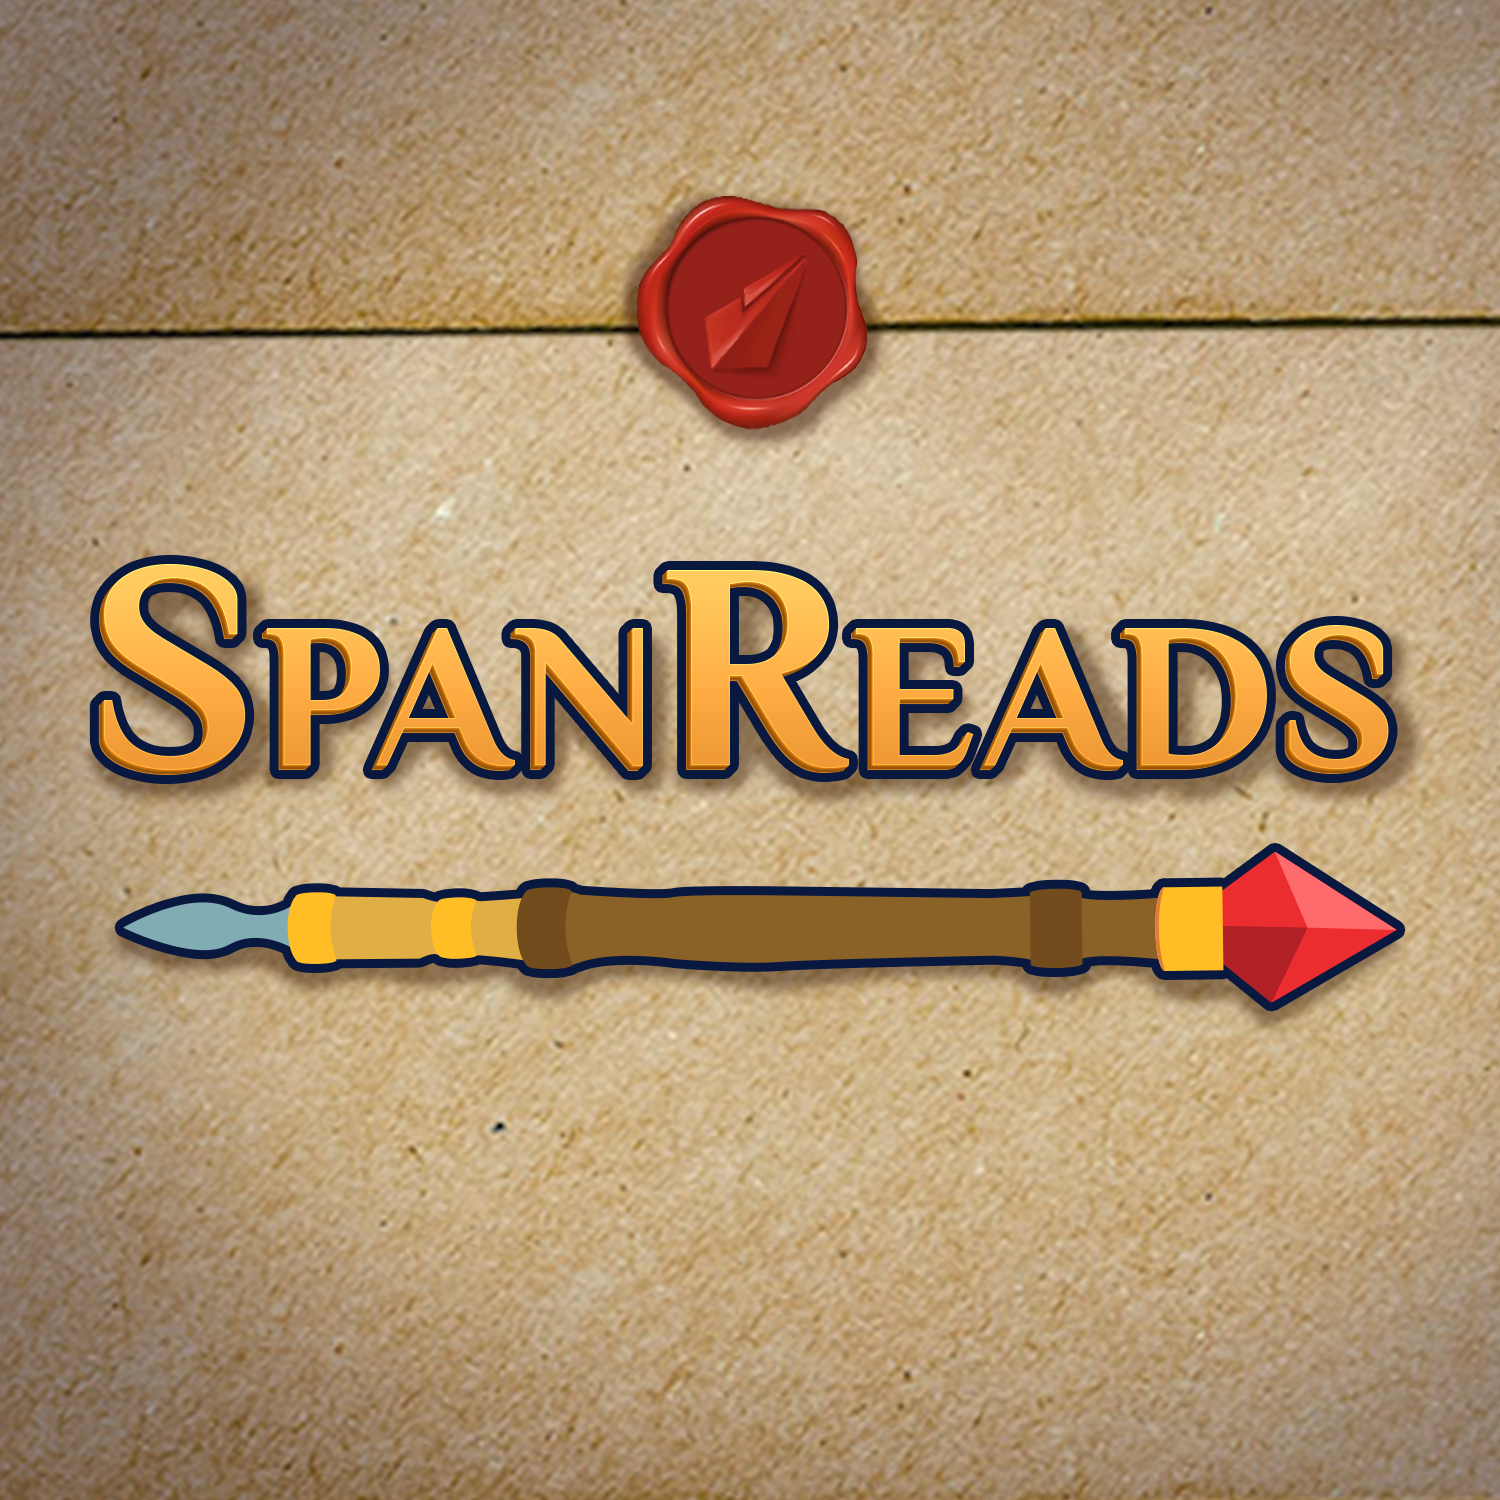 More information about "SpanReads: Shadows of Self - Recap & Reactions"